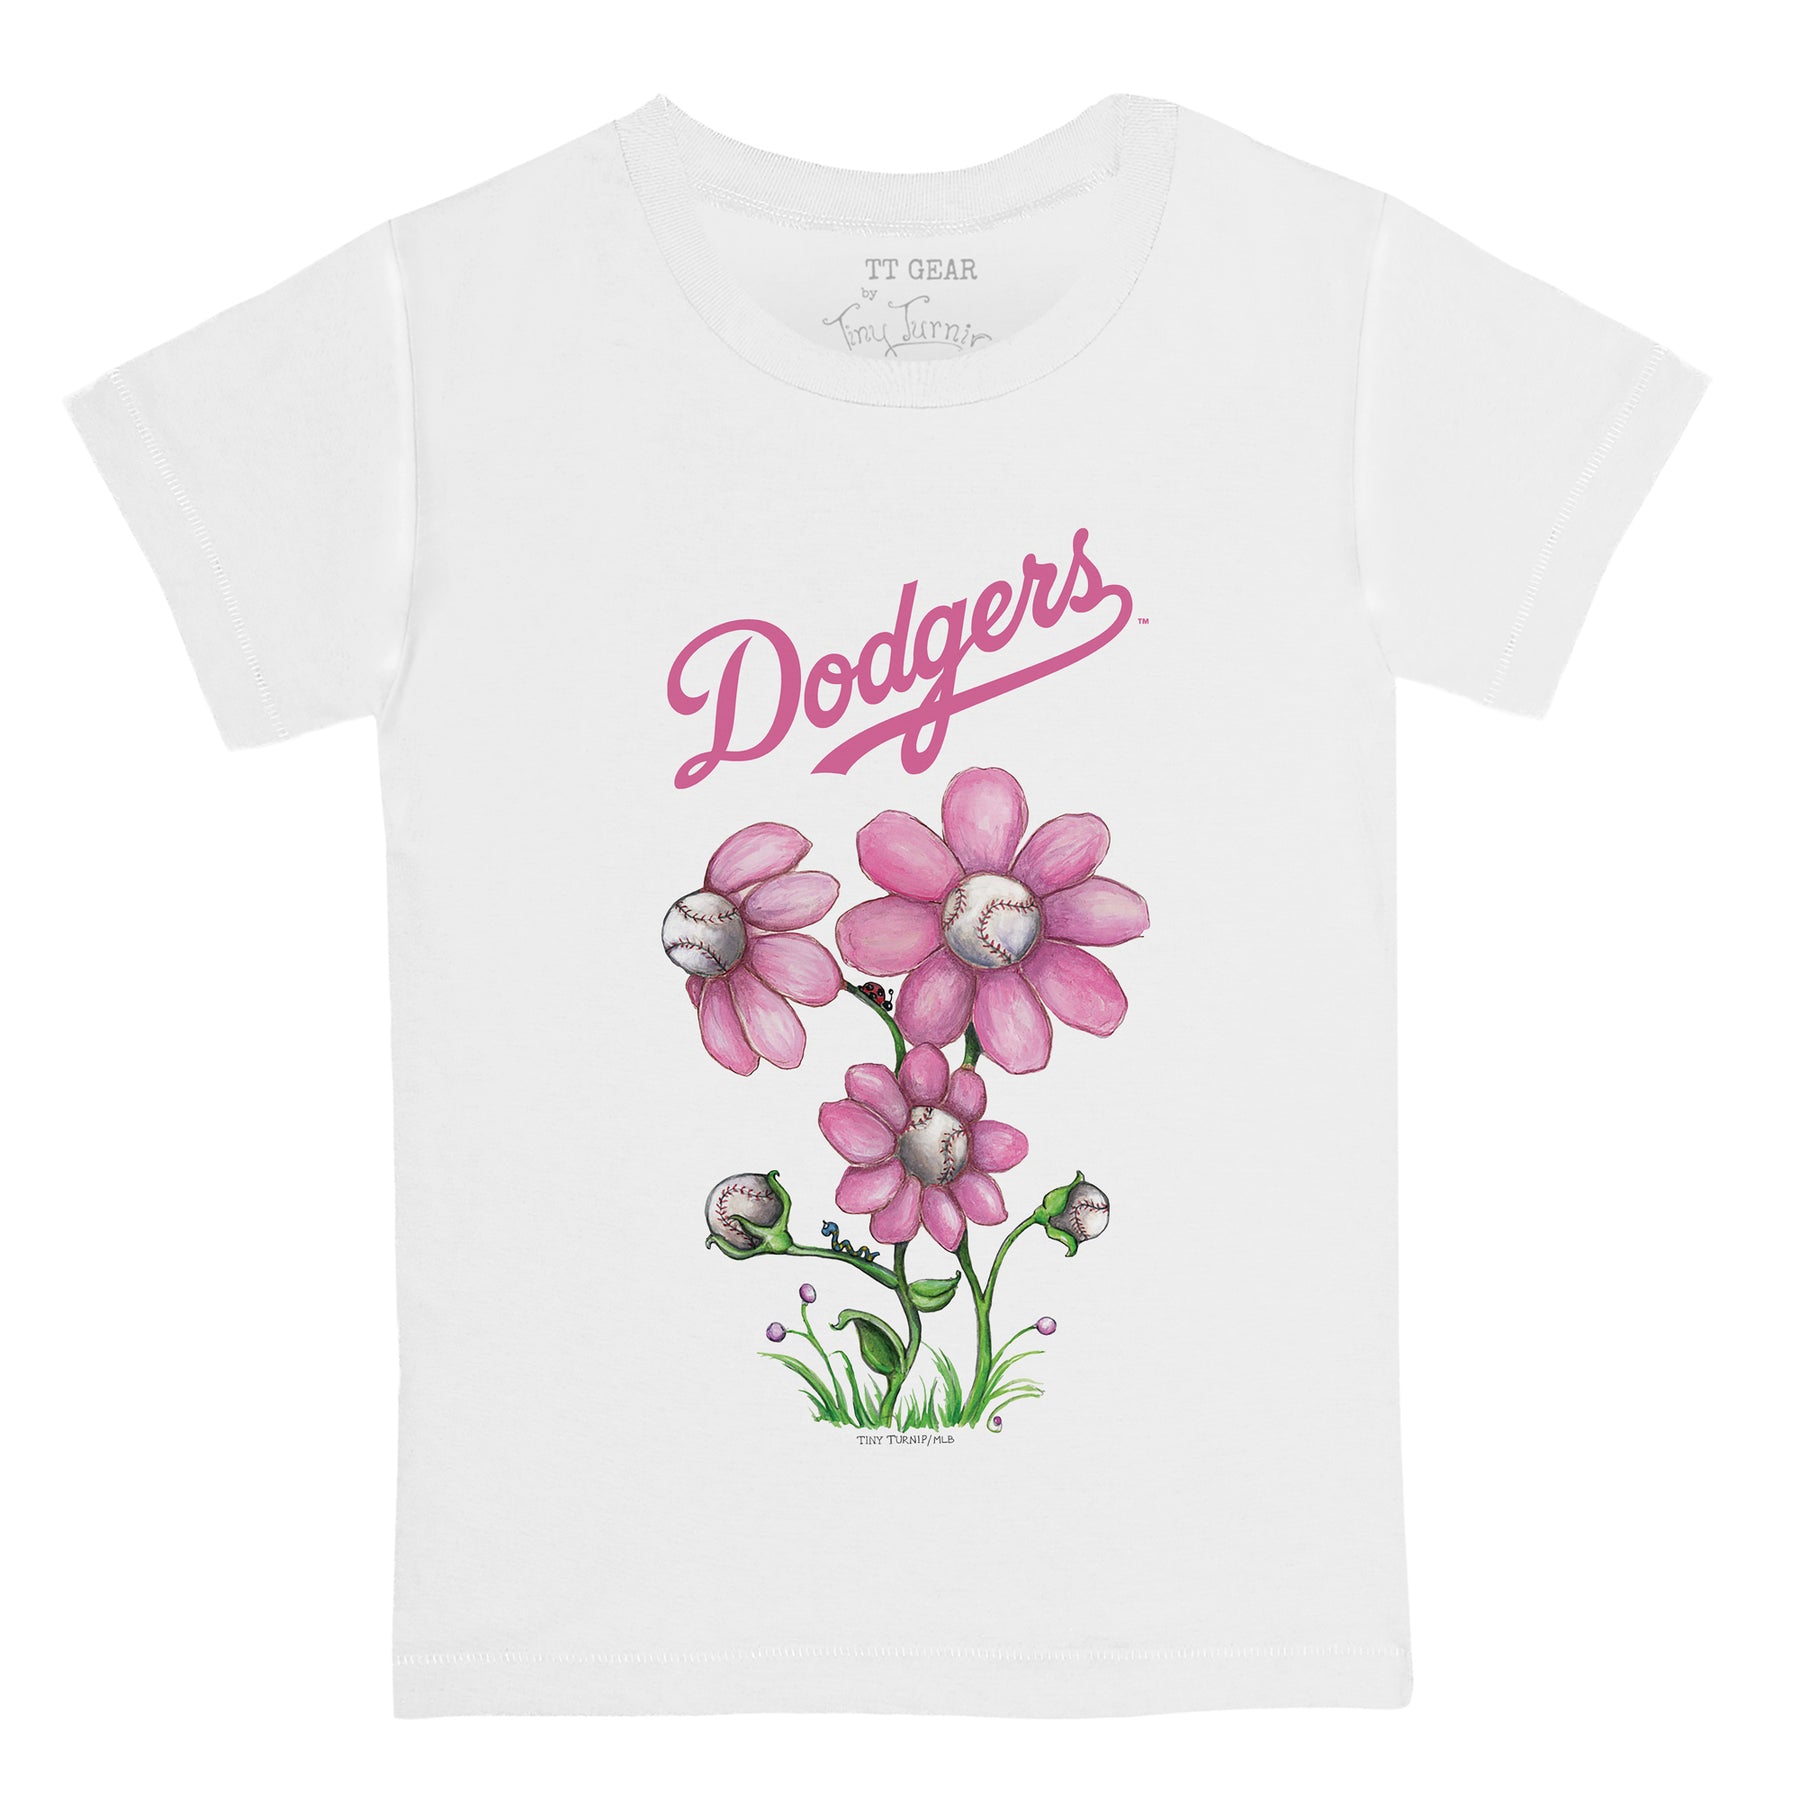 los angeles dodgers pink jersey